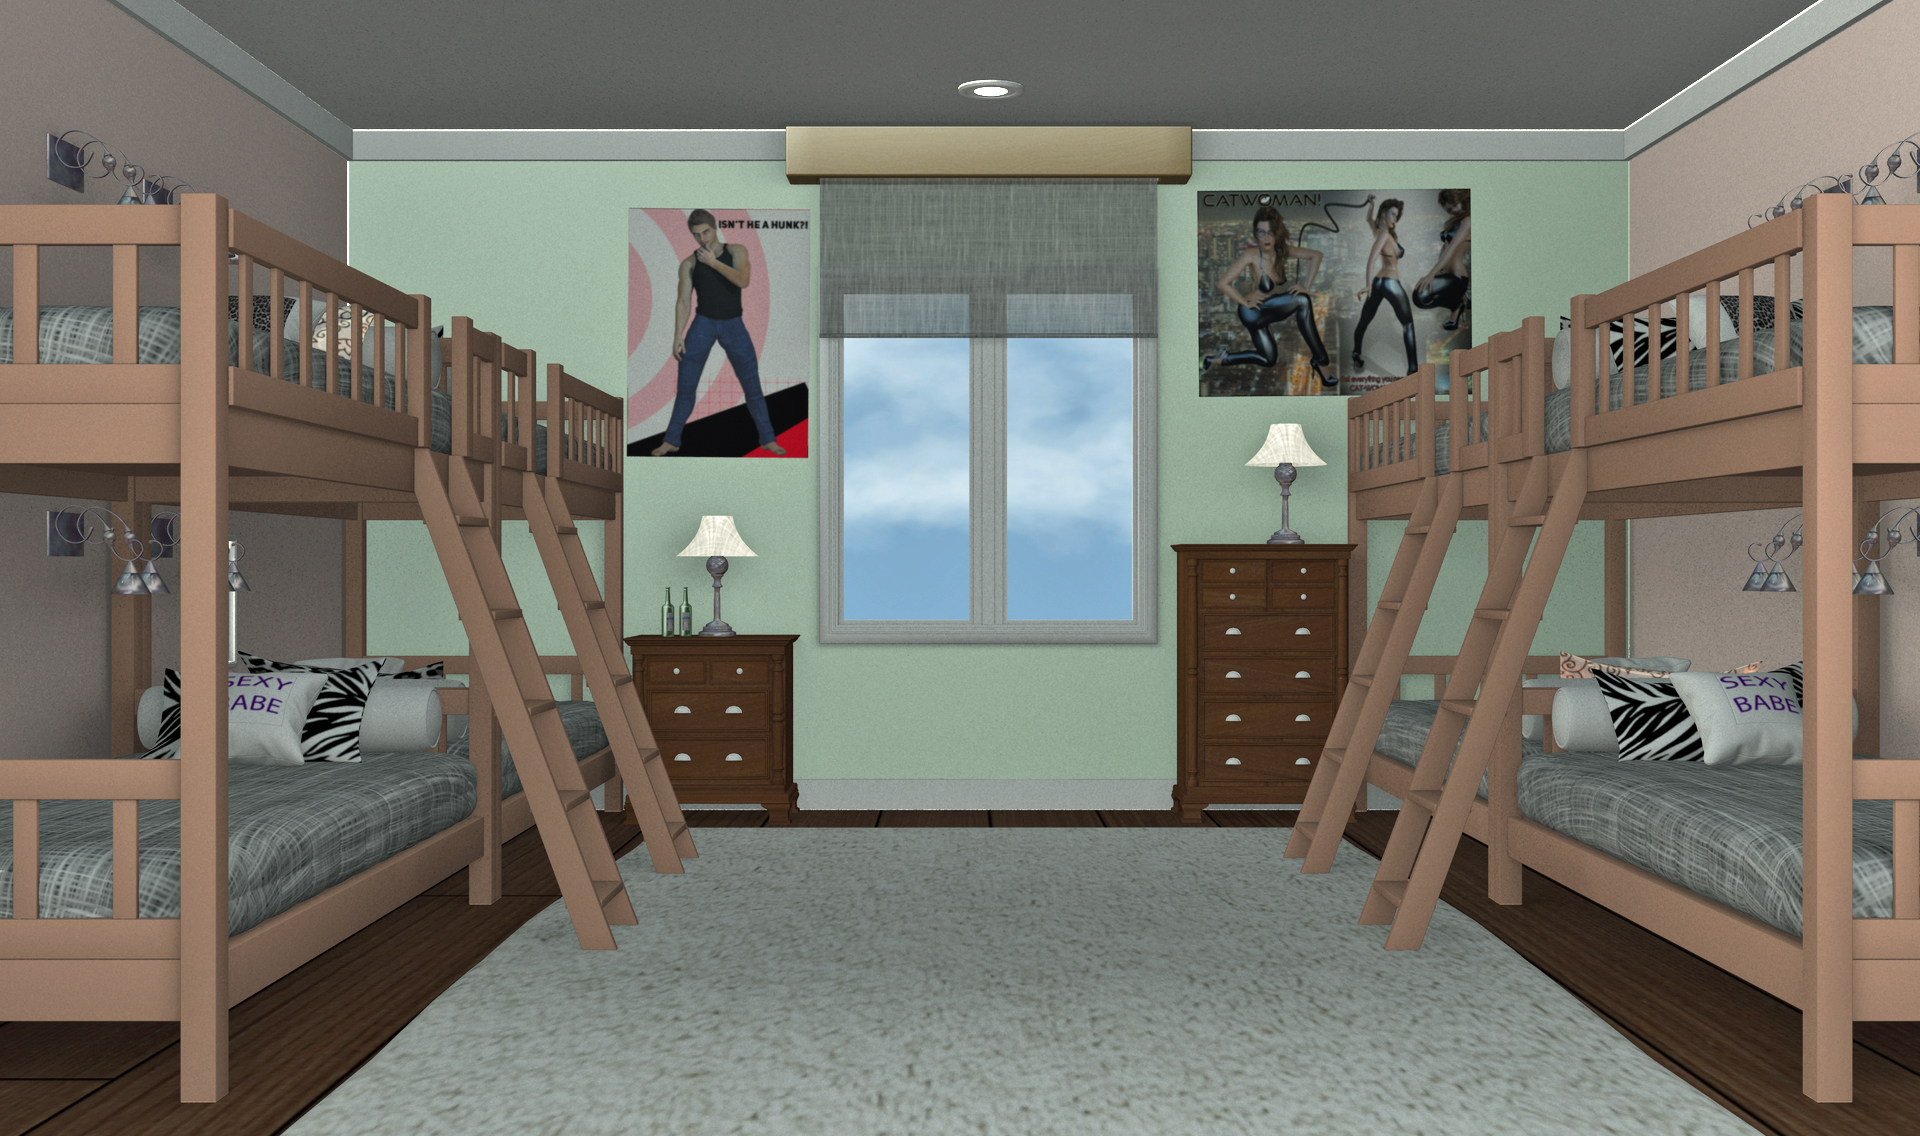 INT. COLLEGE DORM W/BUNK BEDS 1 – DAY